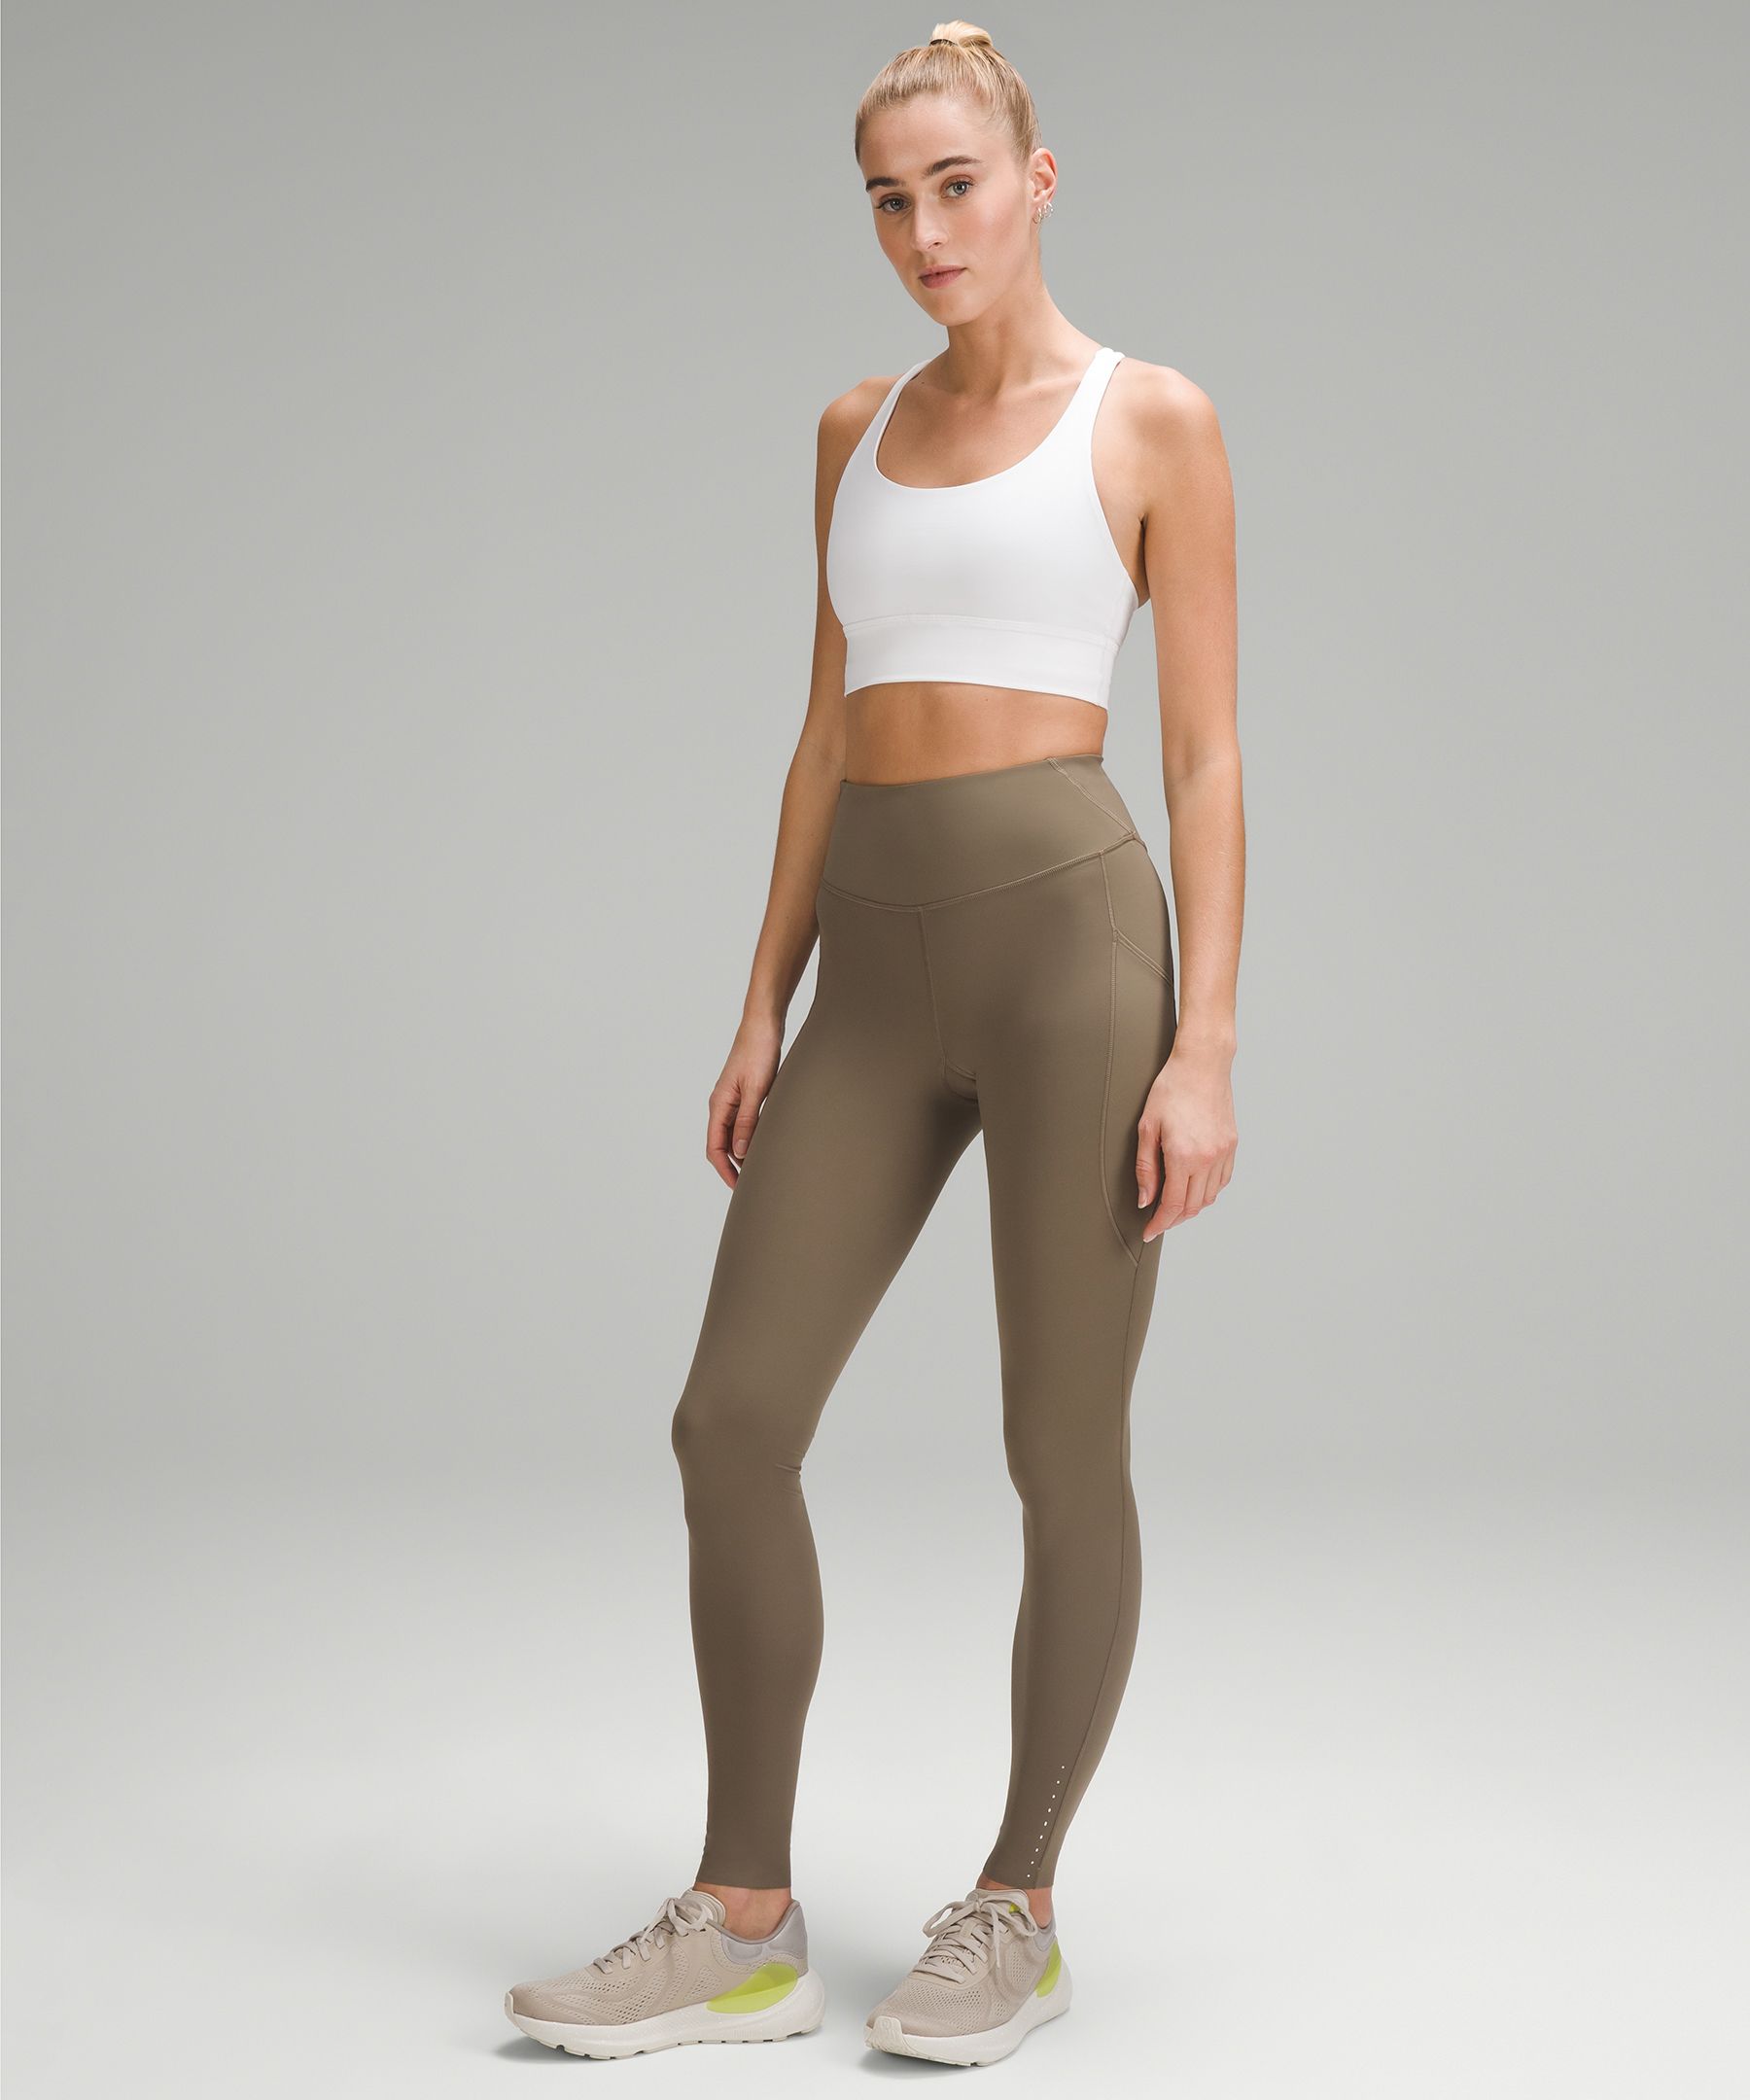 What's New in Activewear